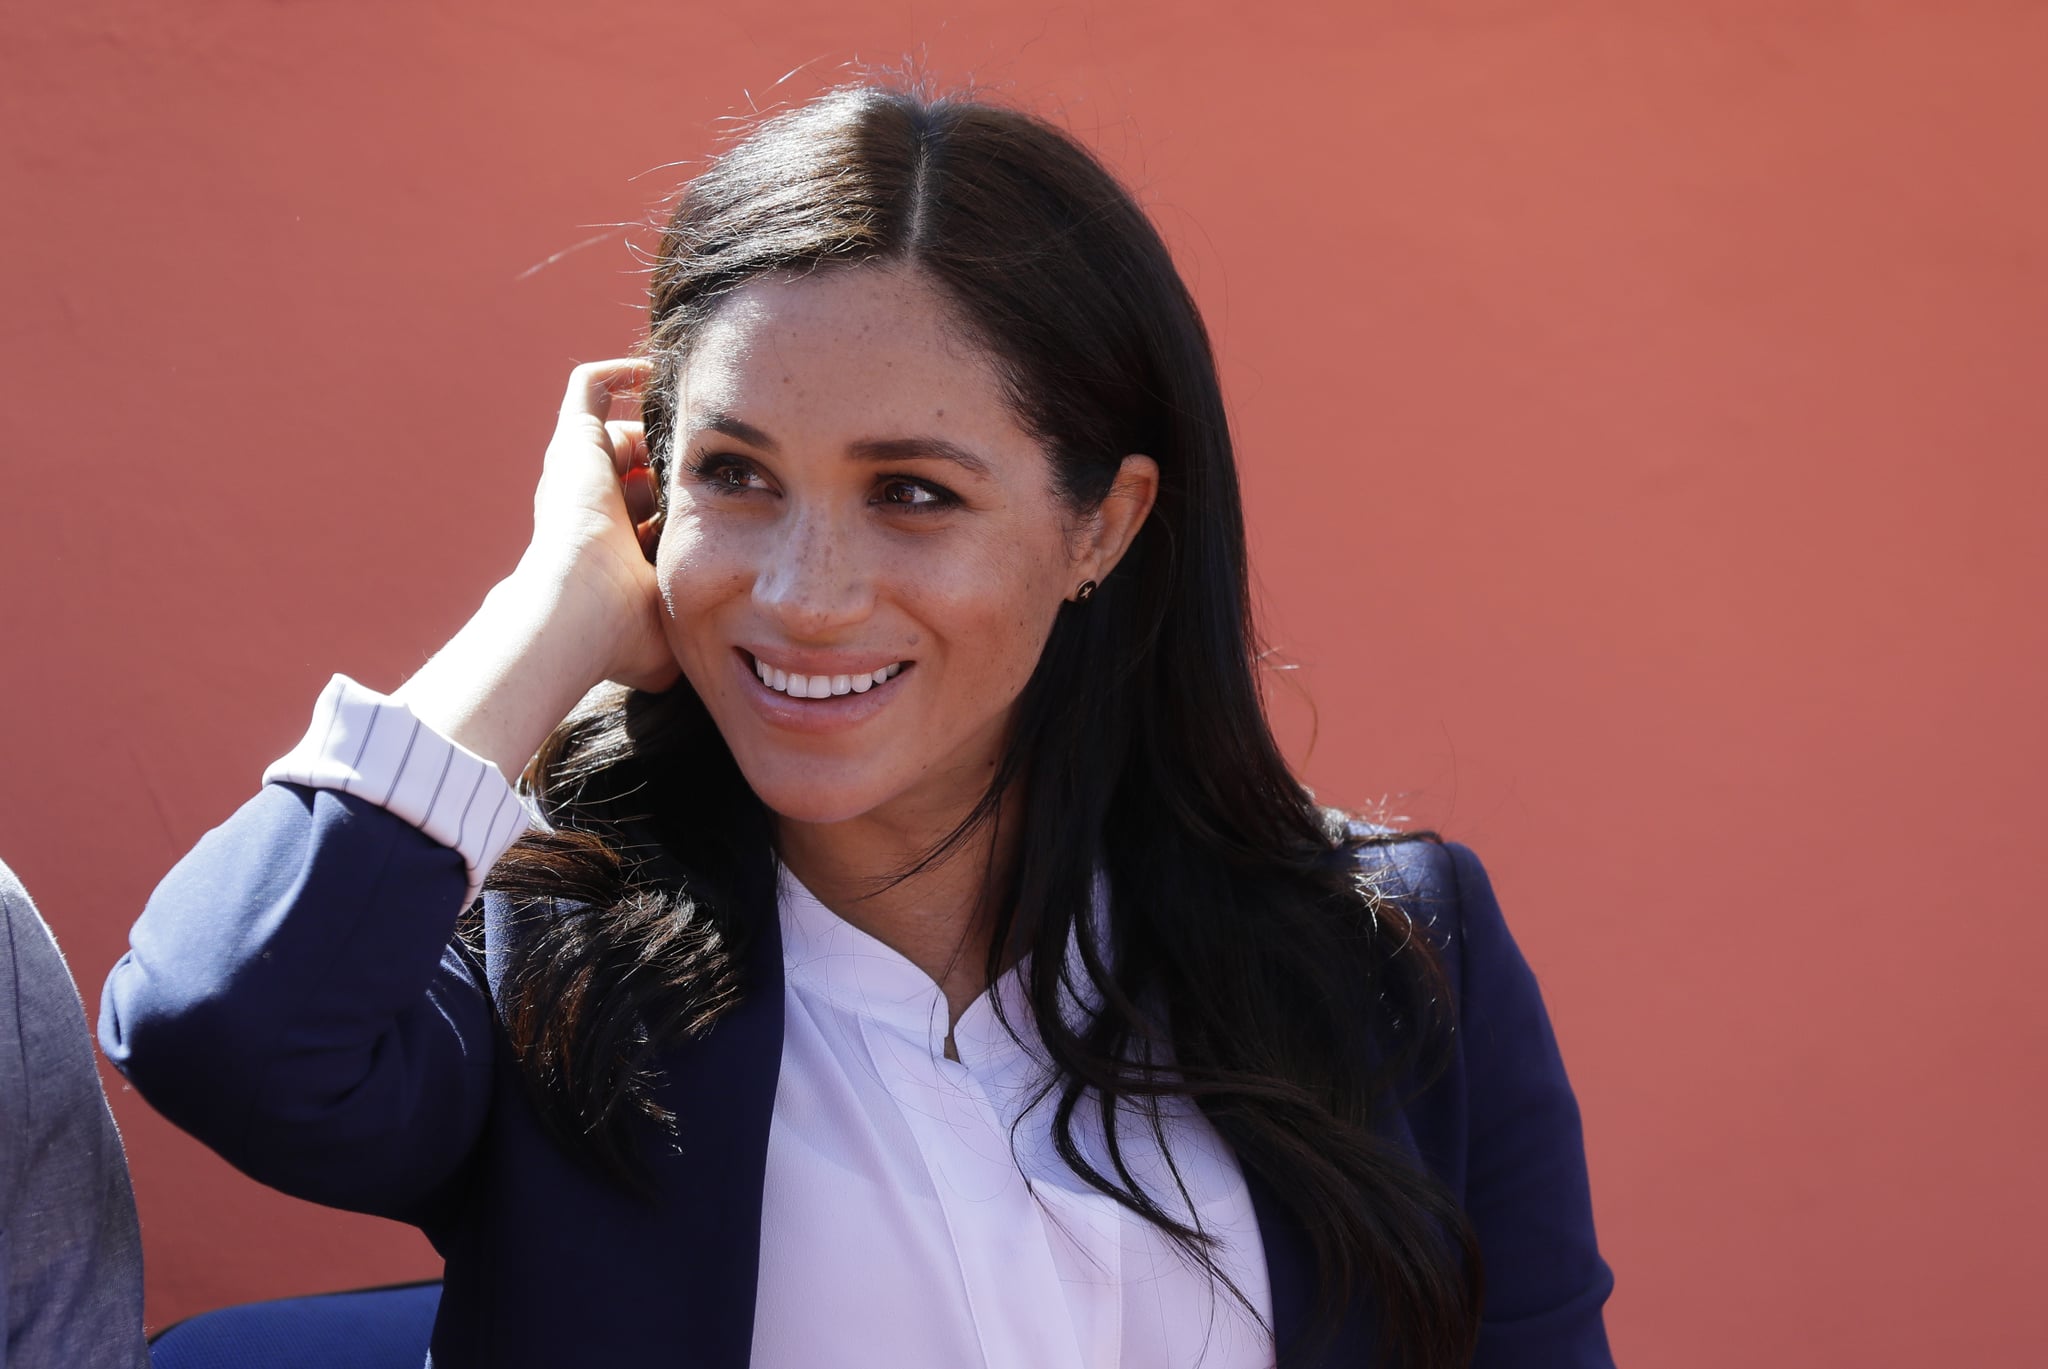 ASNI, MOROCCO - FEBRUARY 24: Meghan, Duchess of Sussex attends an Investiture for Michael McHugo the founder of 'Education for All' with the Most Excellent Order of the British Empire on February 24, 2019 in Asni, Morocco.  The Duke and Duchess of Sussex are on a three day visit to the country. (Photo by Kirsty Wigglesworth - Pool/Getty Images)